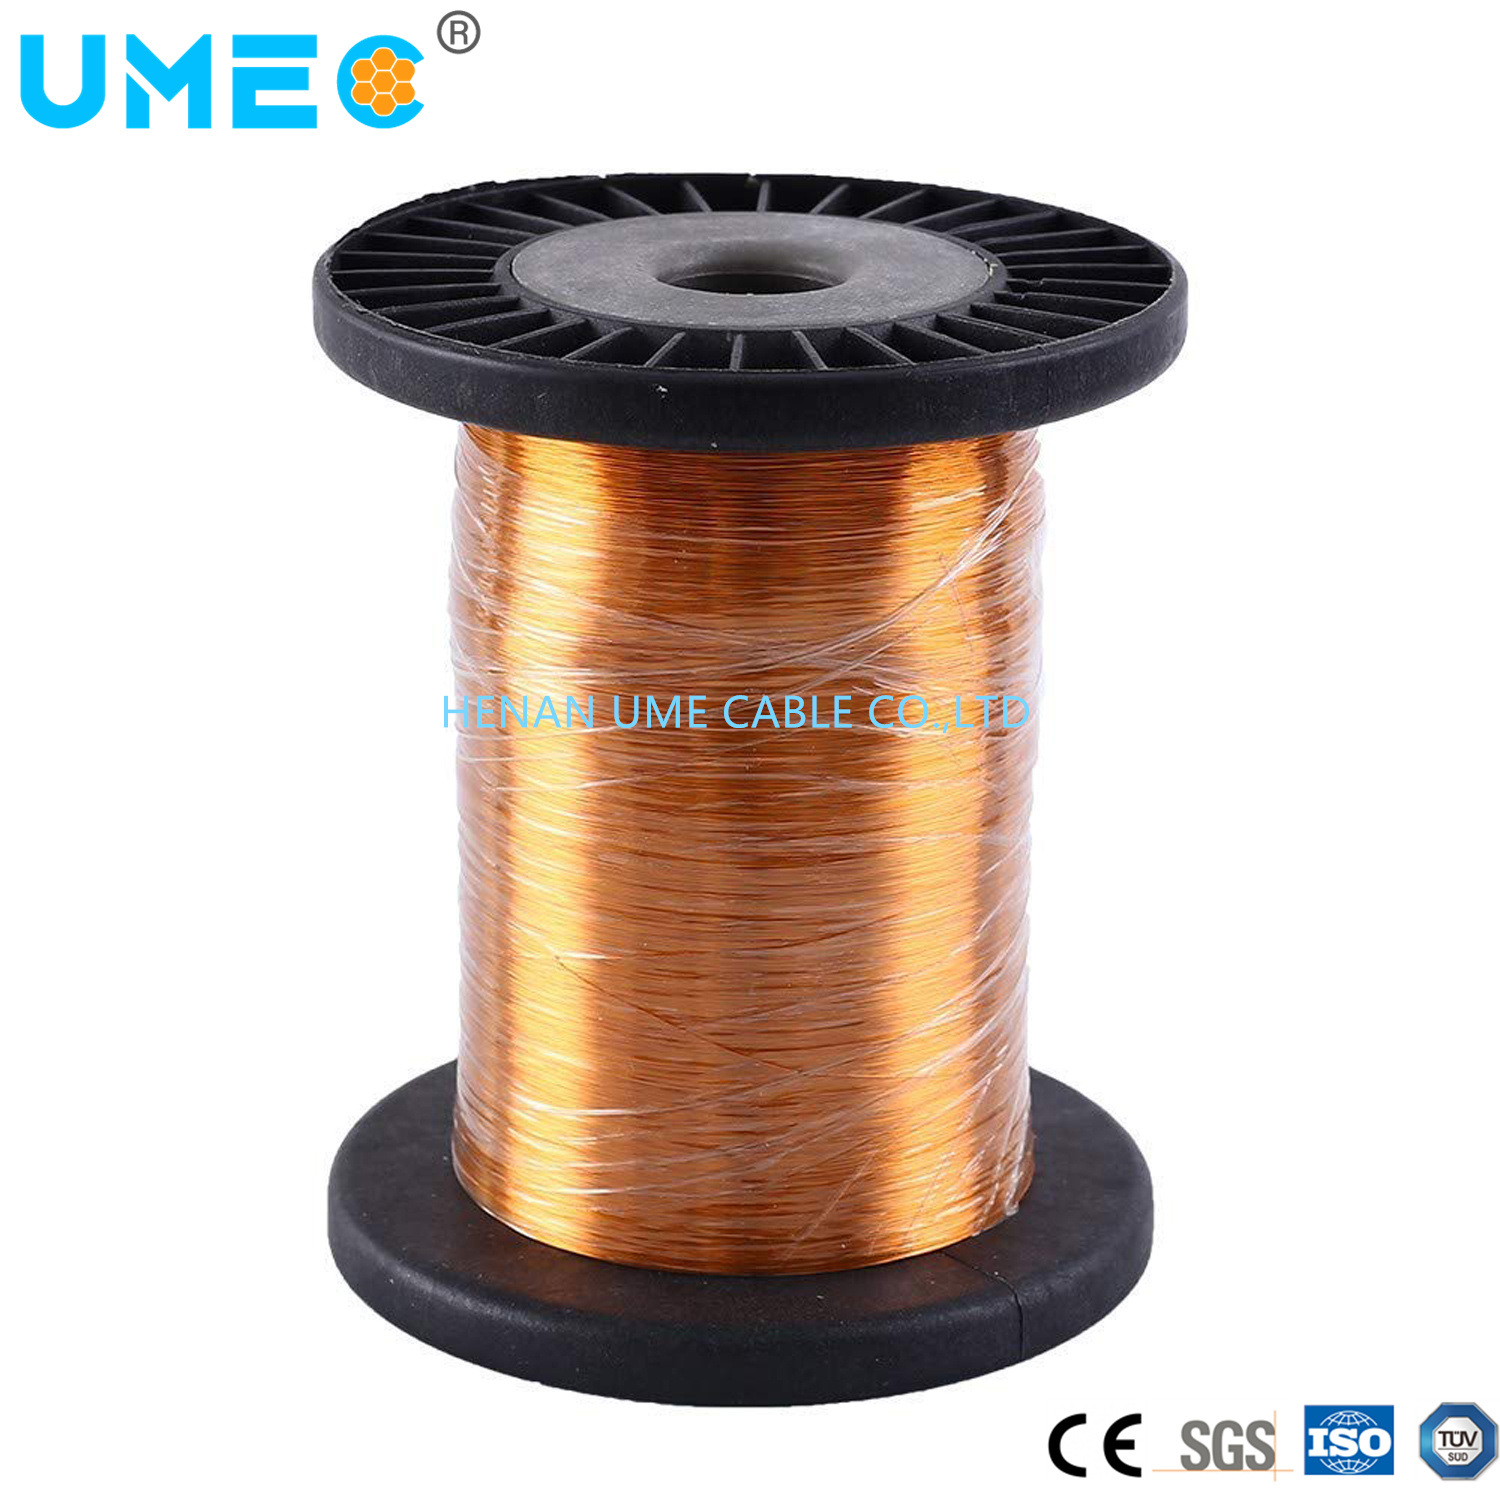 Enameled Copper Wire 0.20-12.00 mm 99.99% Pure Copper Enameled Wire Bare Pure Copper Wire for Sale Factory Price Cable